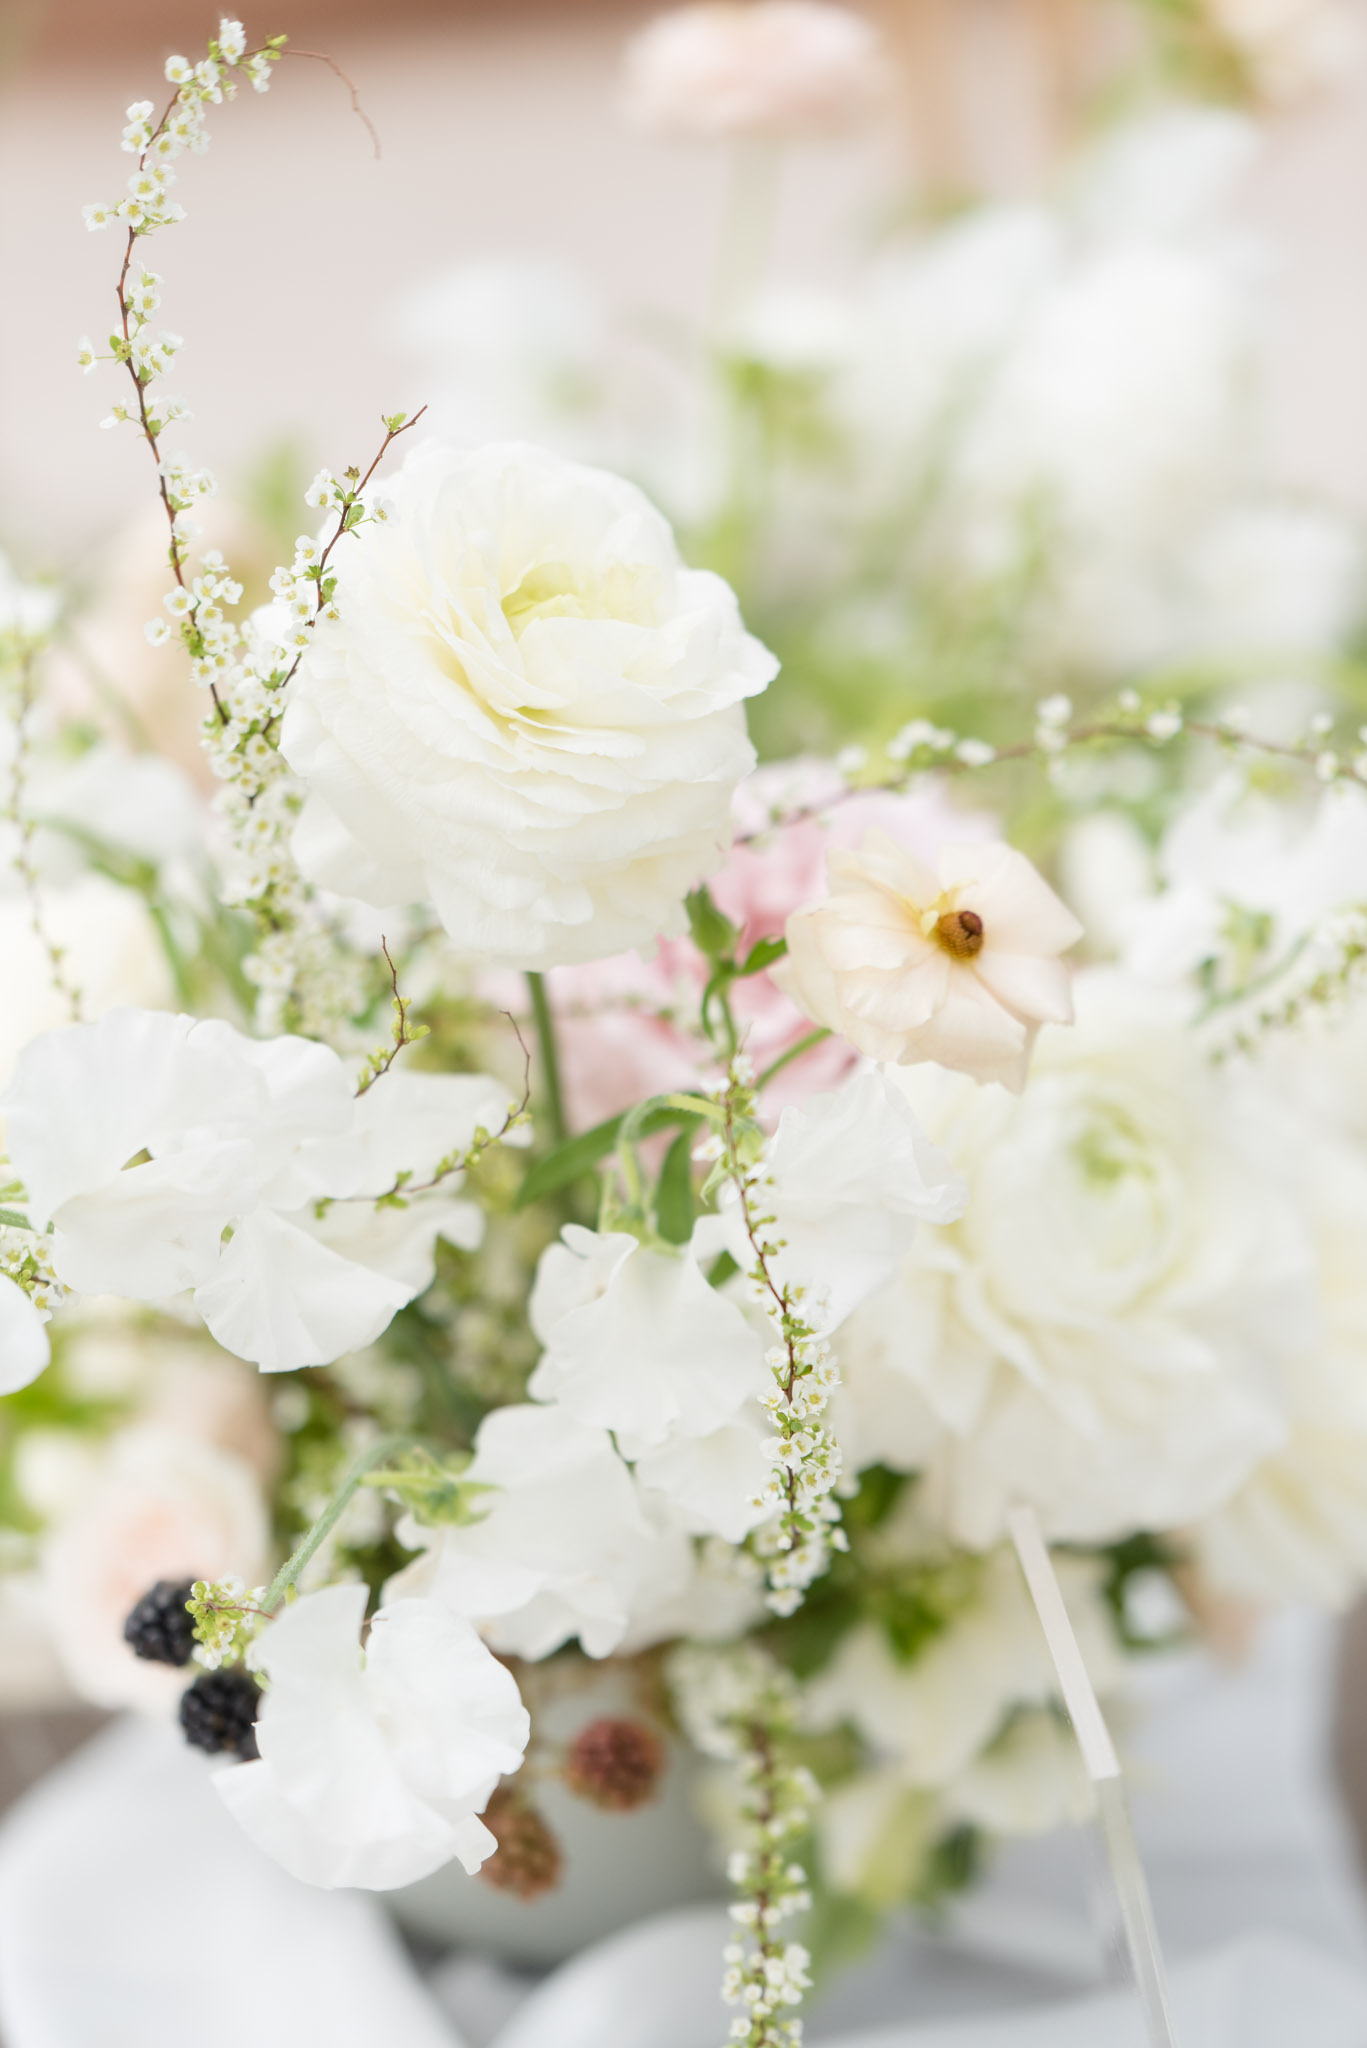 Closeup of white flowers in bouquet.